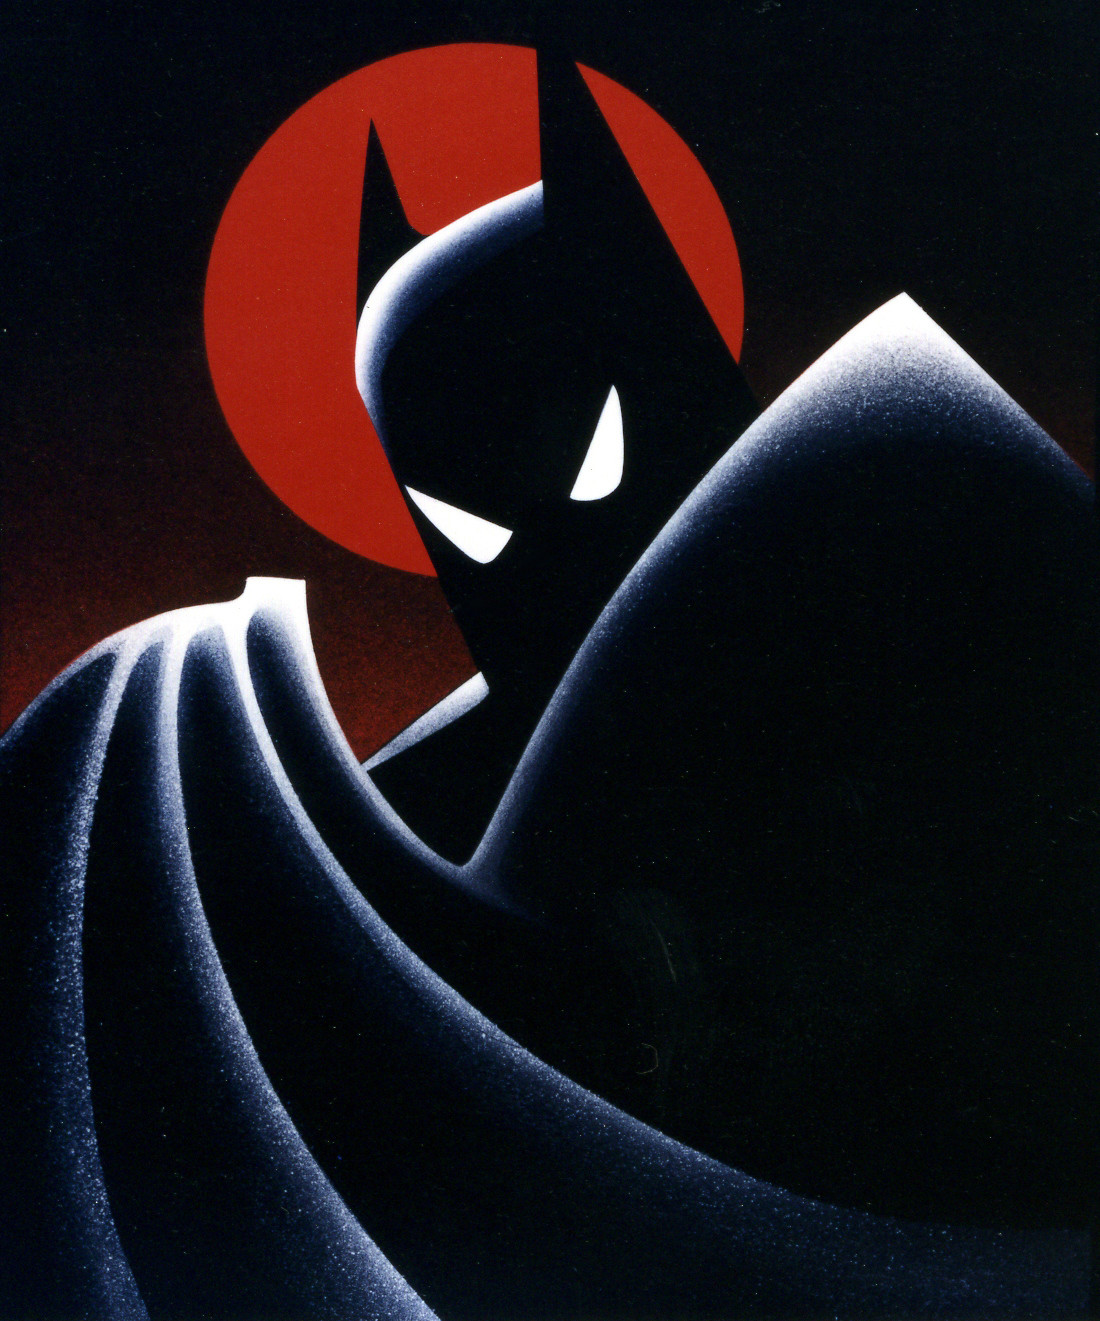 Batman: The Animated Series, HBO Max Wiki